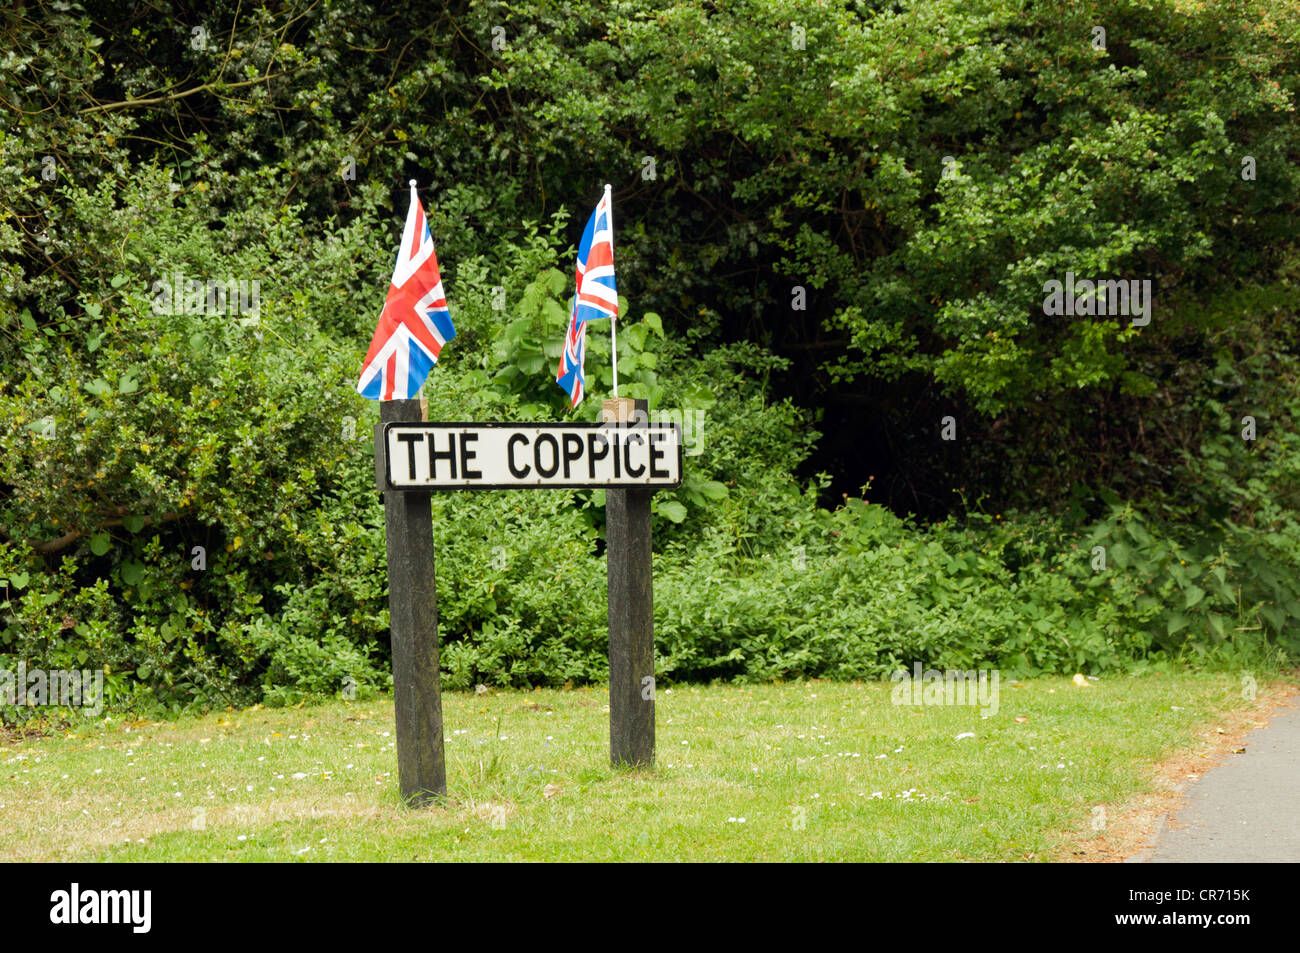 Two Union Jacks (Flags) on a roadside street sign in celebration of the Queen's Diamond Jubilee Stock Photo